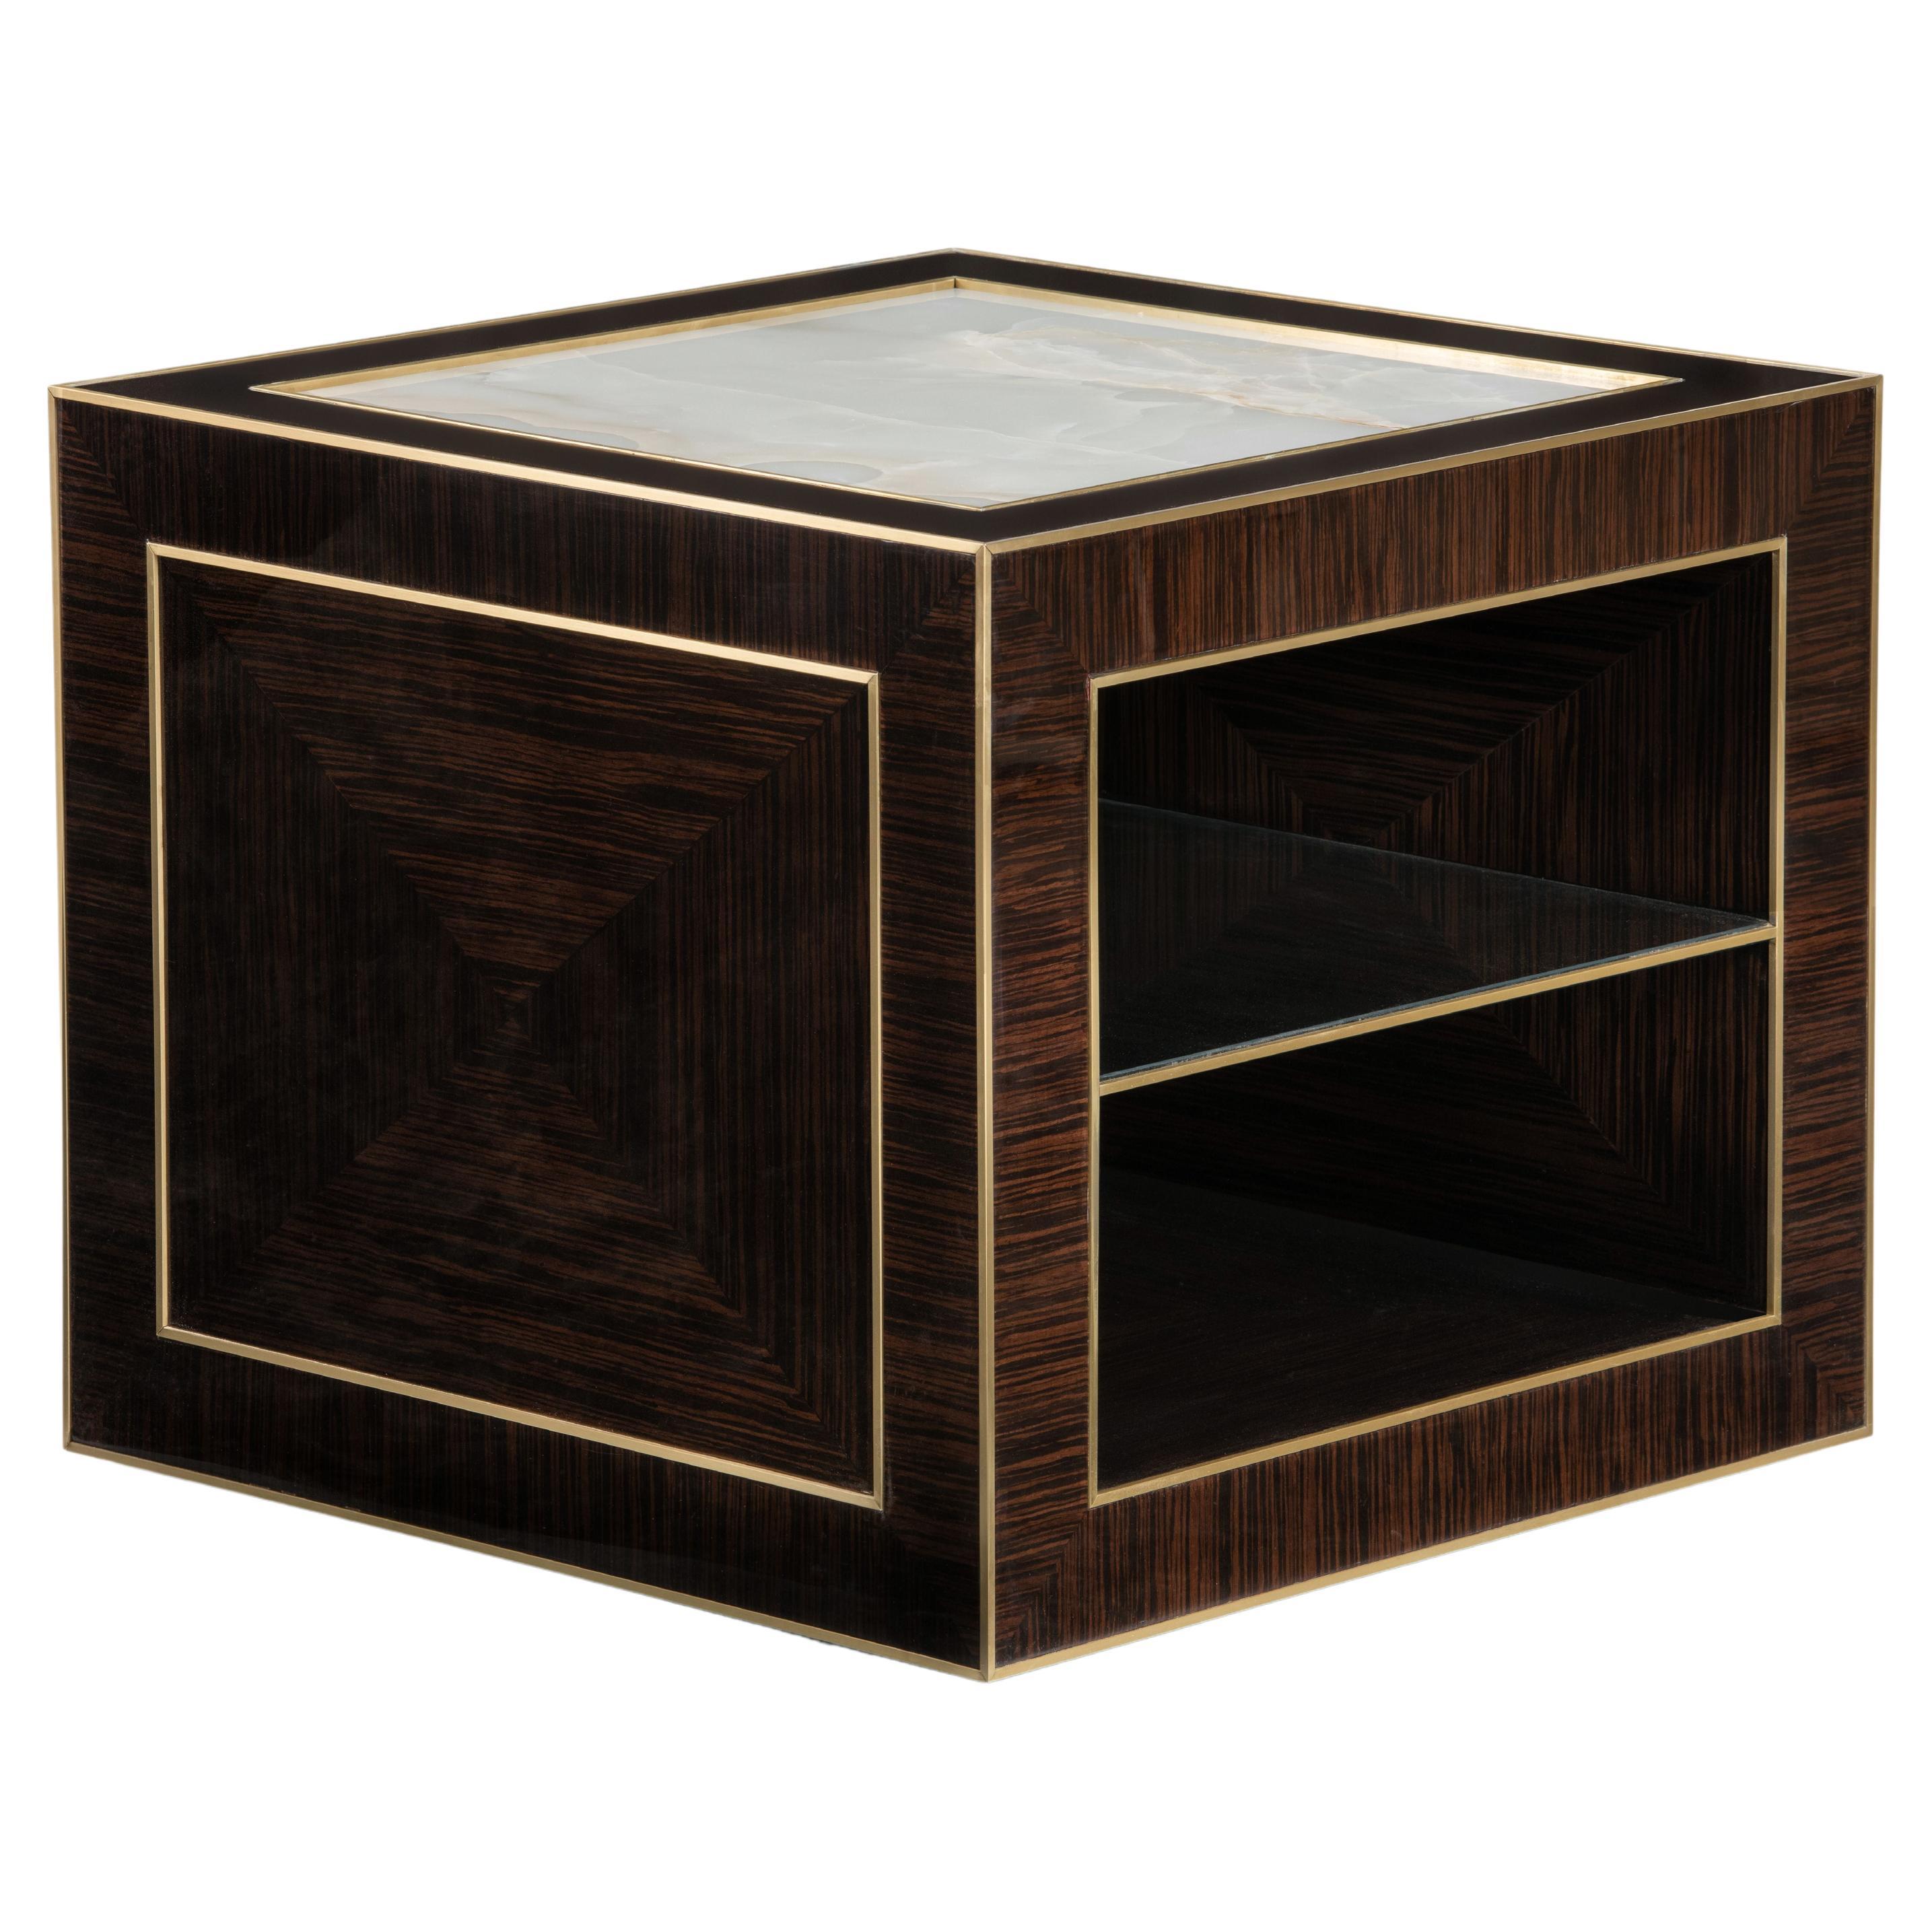 The Cube Side Table